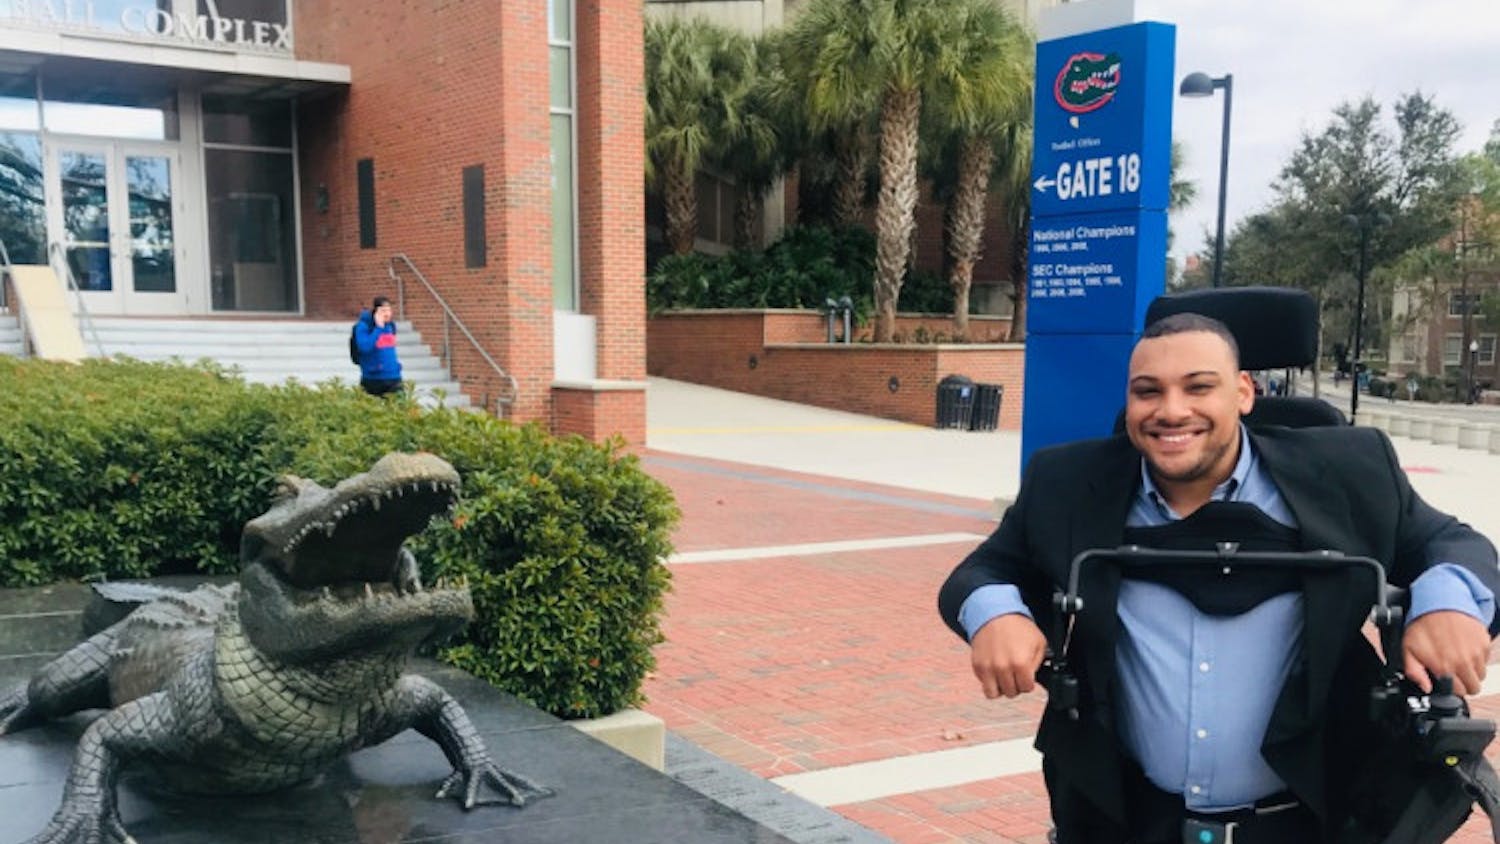 Dees first used the chair's standing feature in a speech to UF alumni and administration